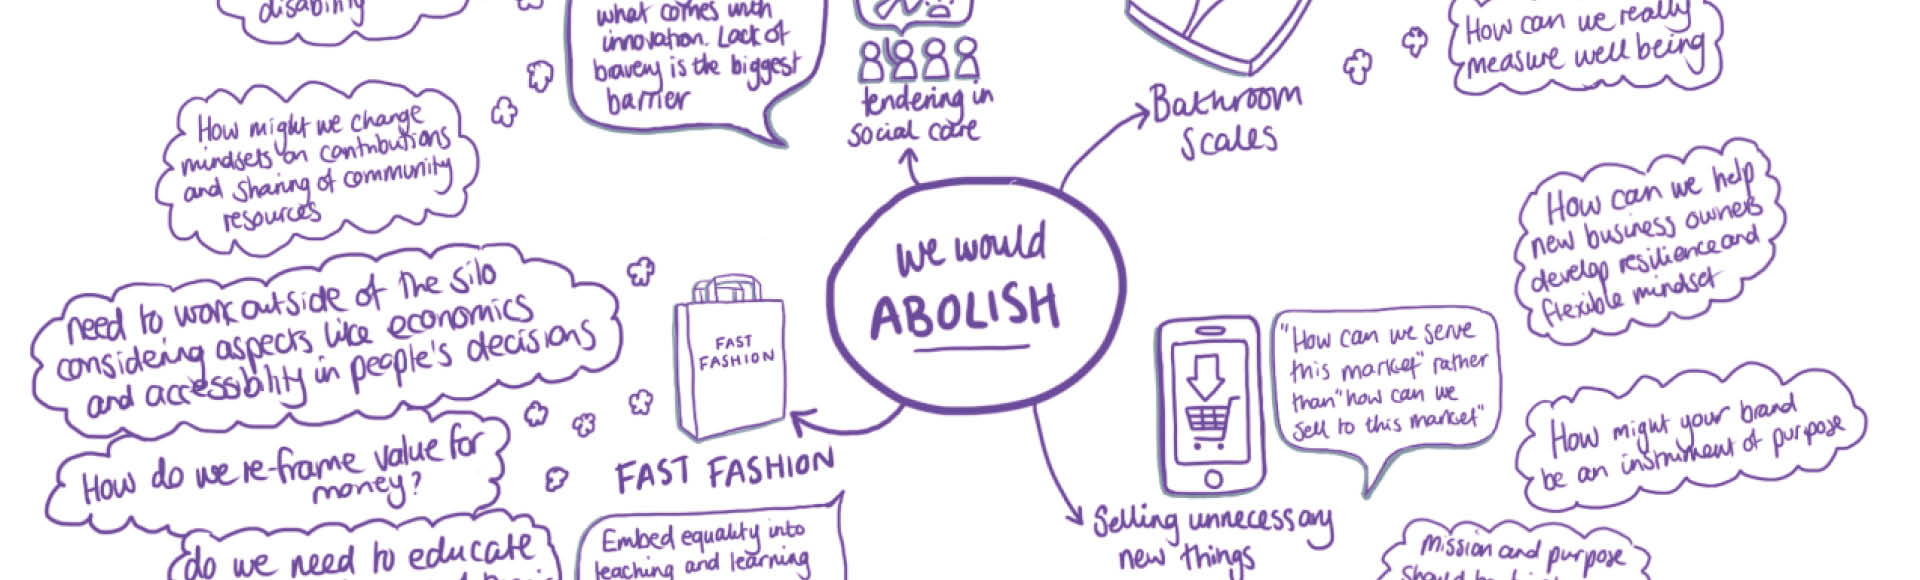 Purple mind-map of "we would abolish.." ideation from the CAKE